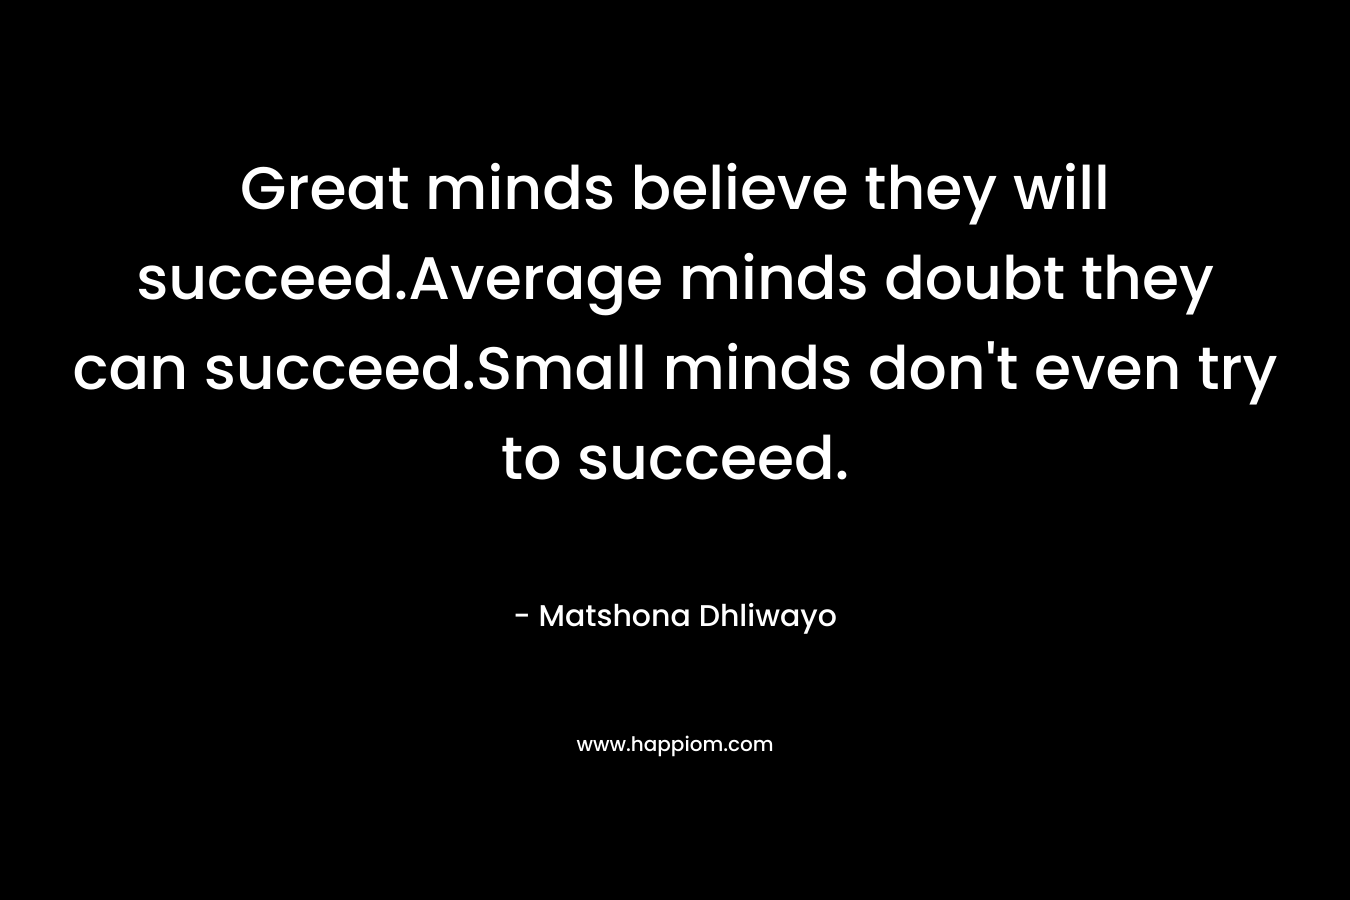 Great minds believe they will succeed.Average minds doubt they can succeed.Small minds don't even try to succeed.